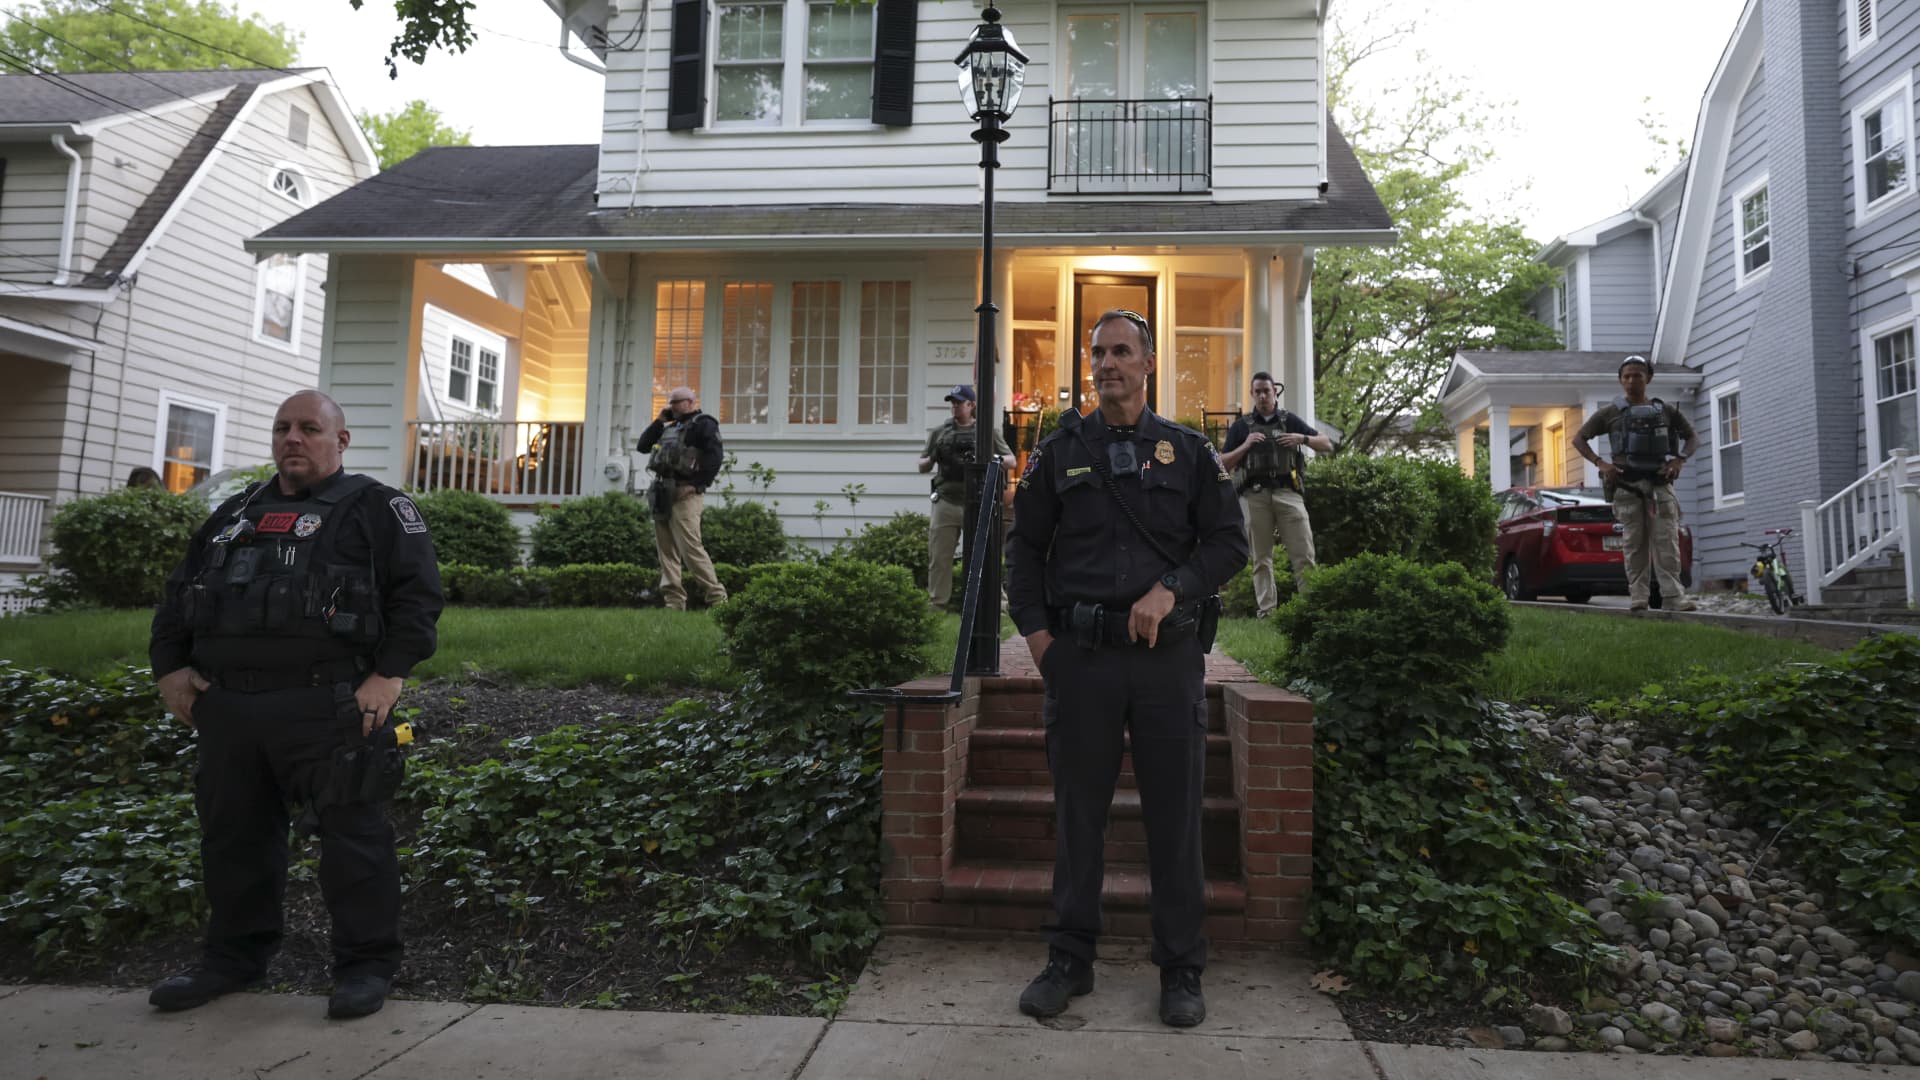 Police stand outside the home of U.S. Associate Justice Brett Kavanaugh as abortion-rights advocates protest on May 11, 2022 in Chevy Chase, Maryland.